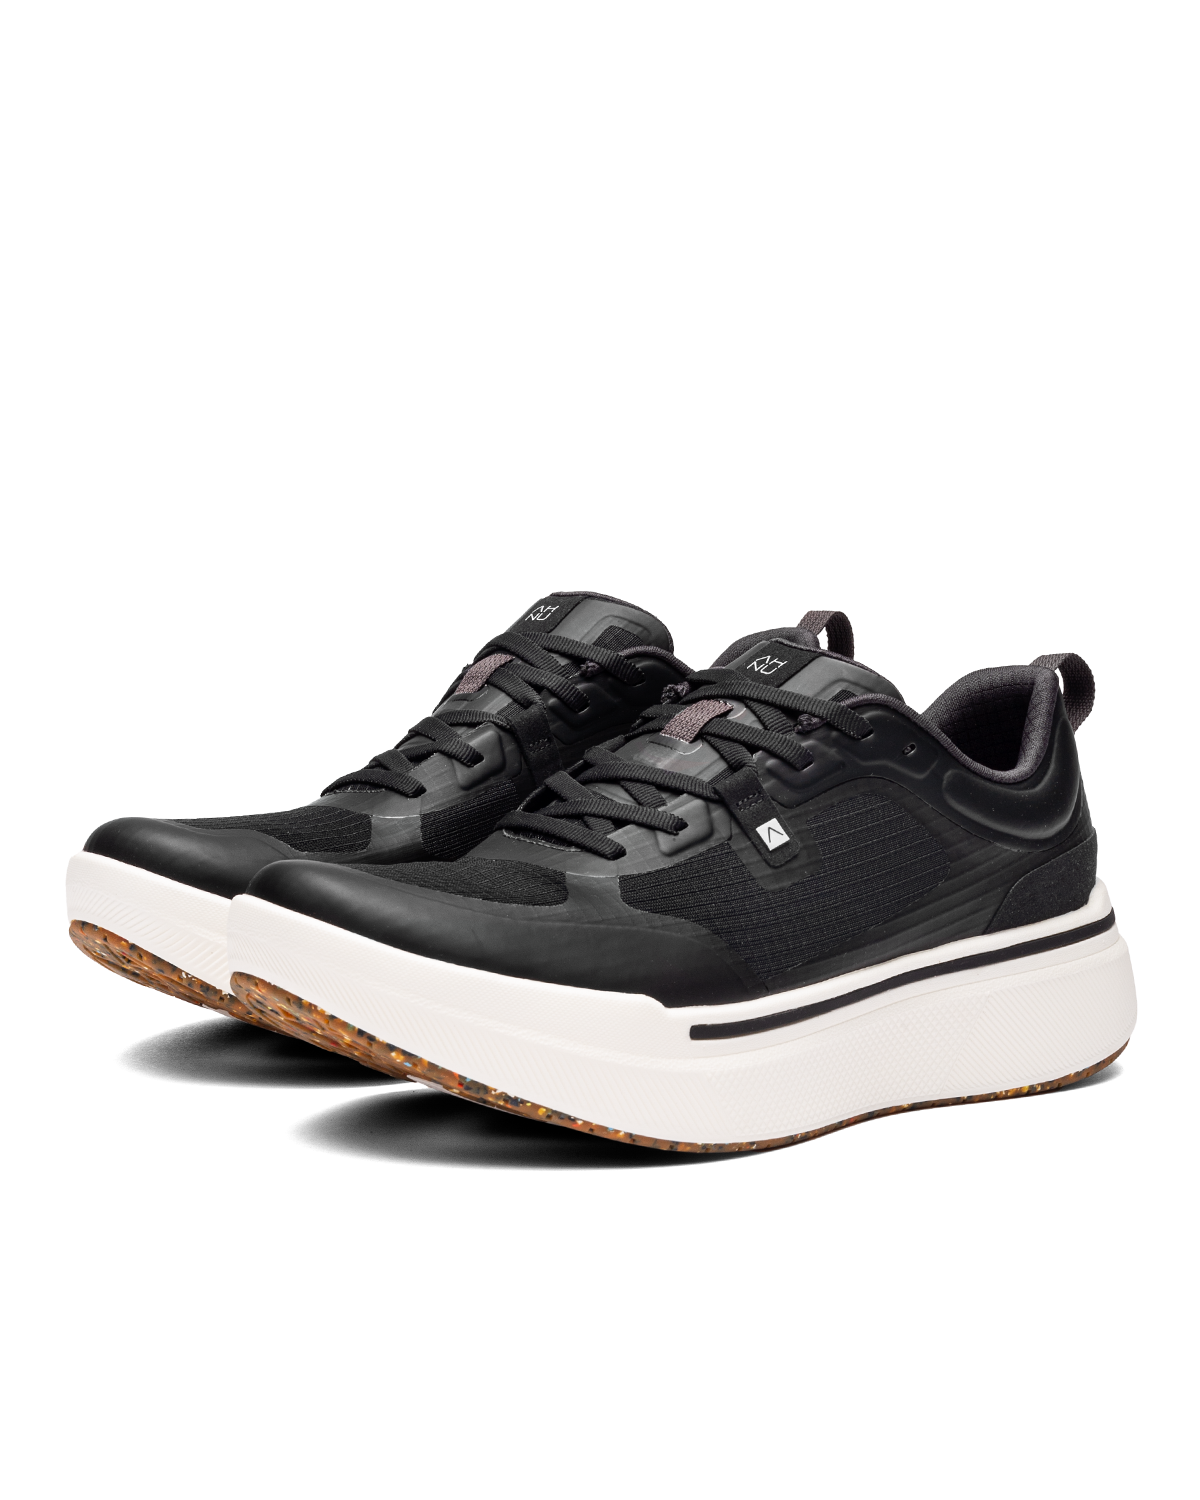 Sequence 1 Low Black / White (Women's)